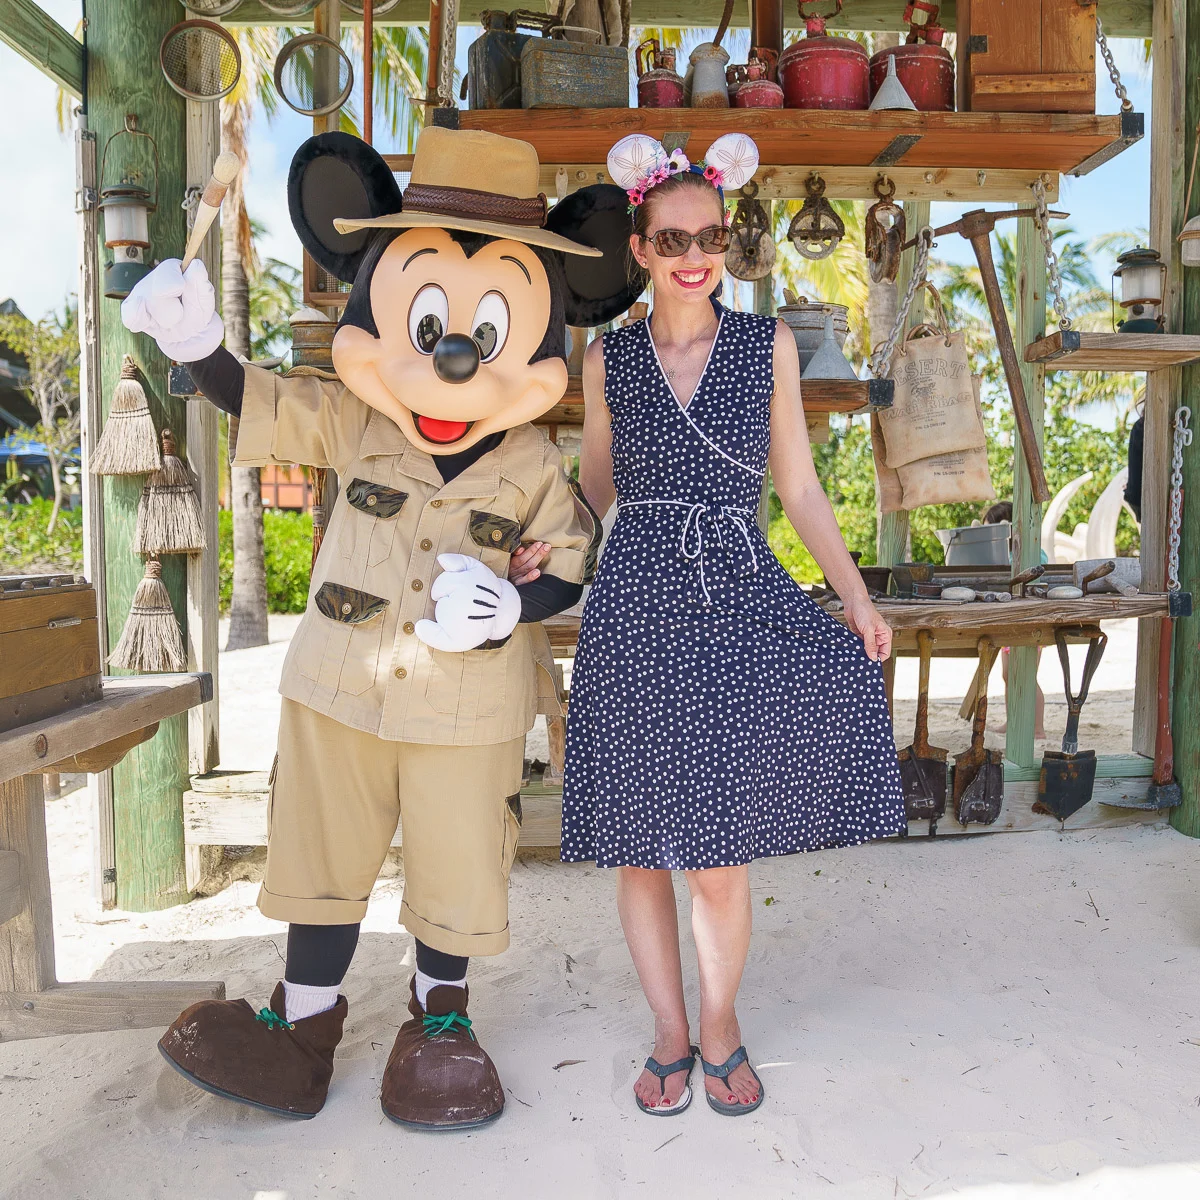 Top 10 Things to Do on Disney Fantasy featured by top US Disney blogger, Marcie and the Mouse: Meeting Mickey Mouse in his archeologist gear at Castaway Cay